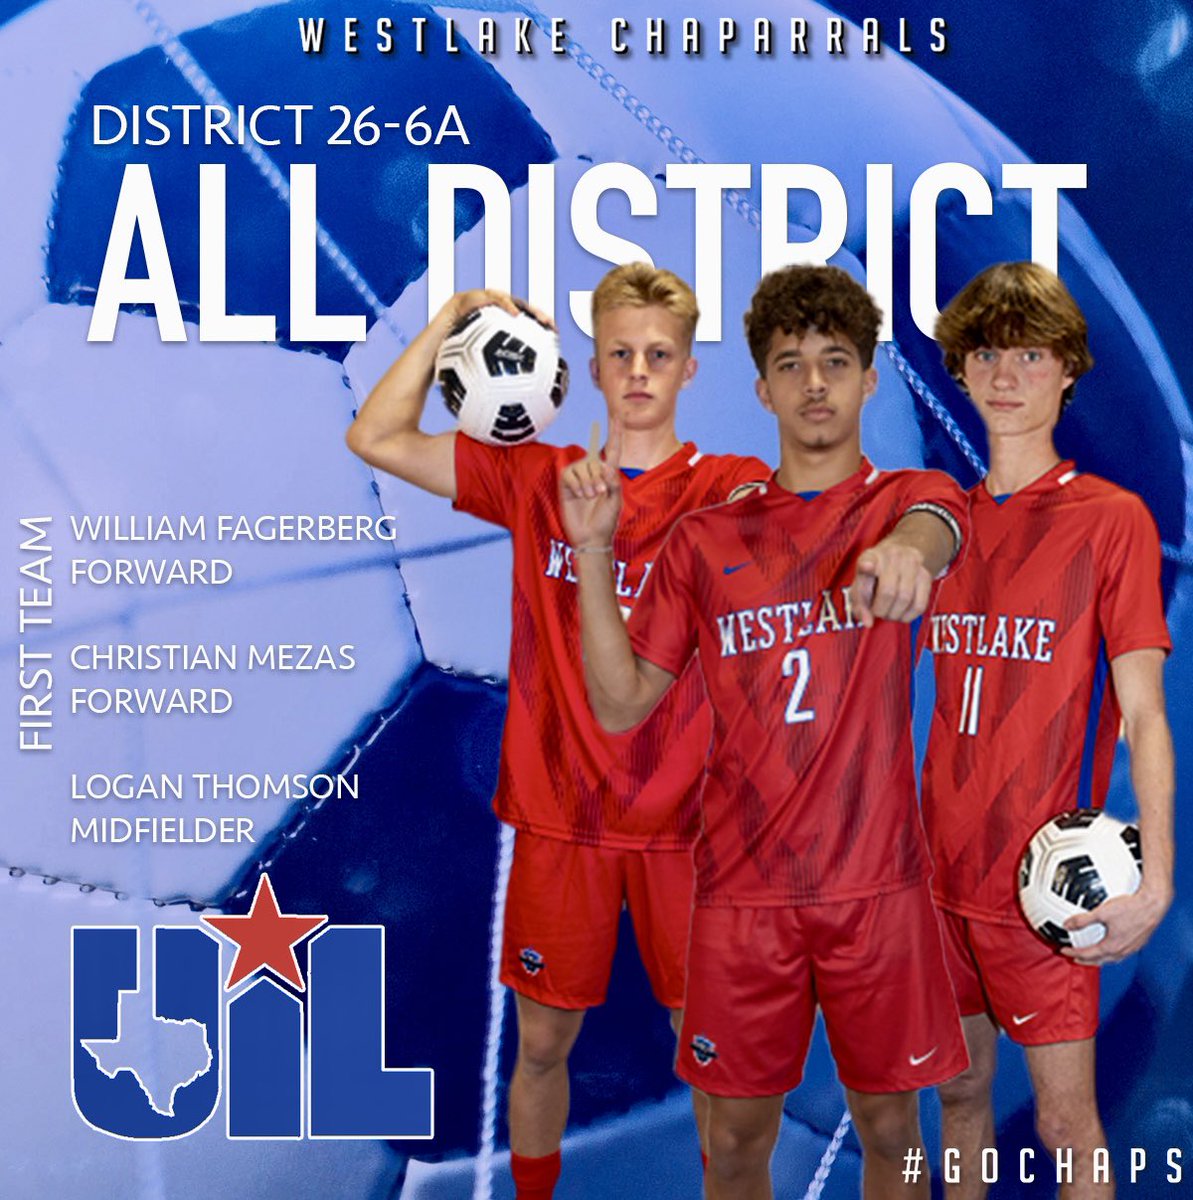 Congratulations to the three Chaps who earned their spots on the 26-6A Men’s Soccer All-District 1st Team. Shoutout to William Fagerberg, Christian Mezas & Logan Thomson. #GoChaps William Fagerberg: Forward Christian Mezas: Forward Logan Thomson: Midfielder